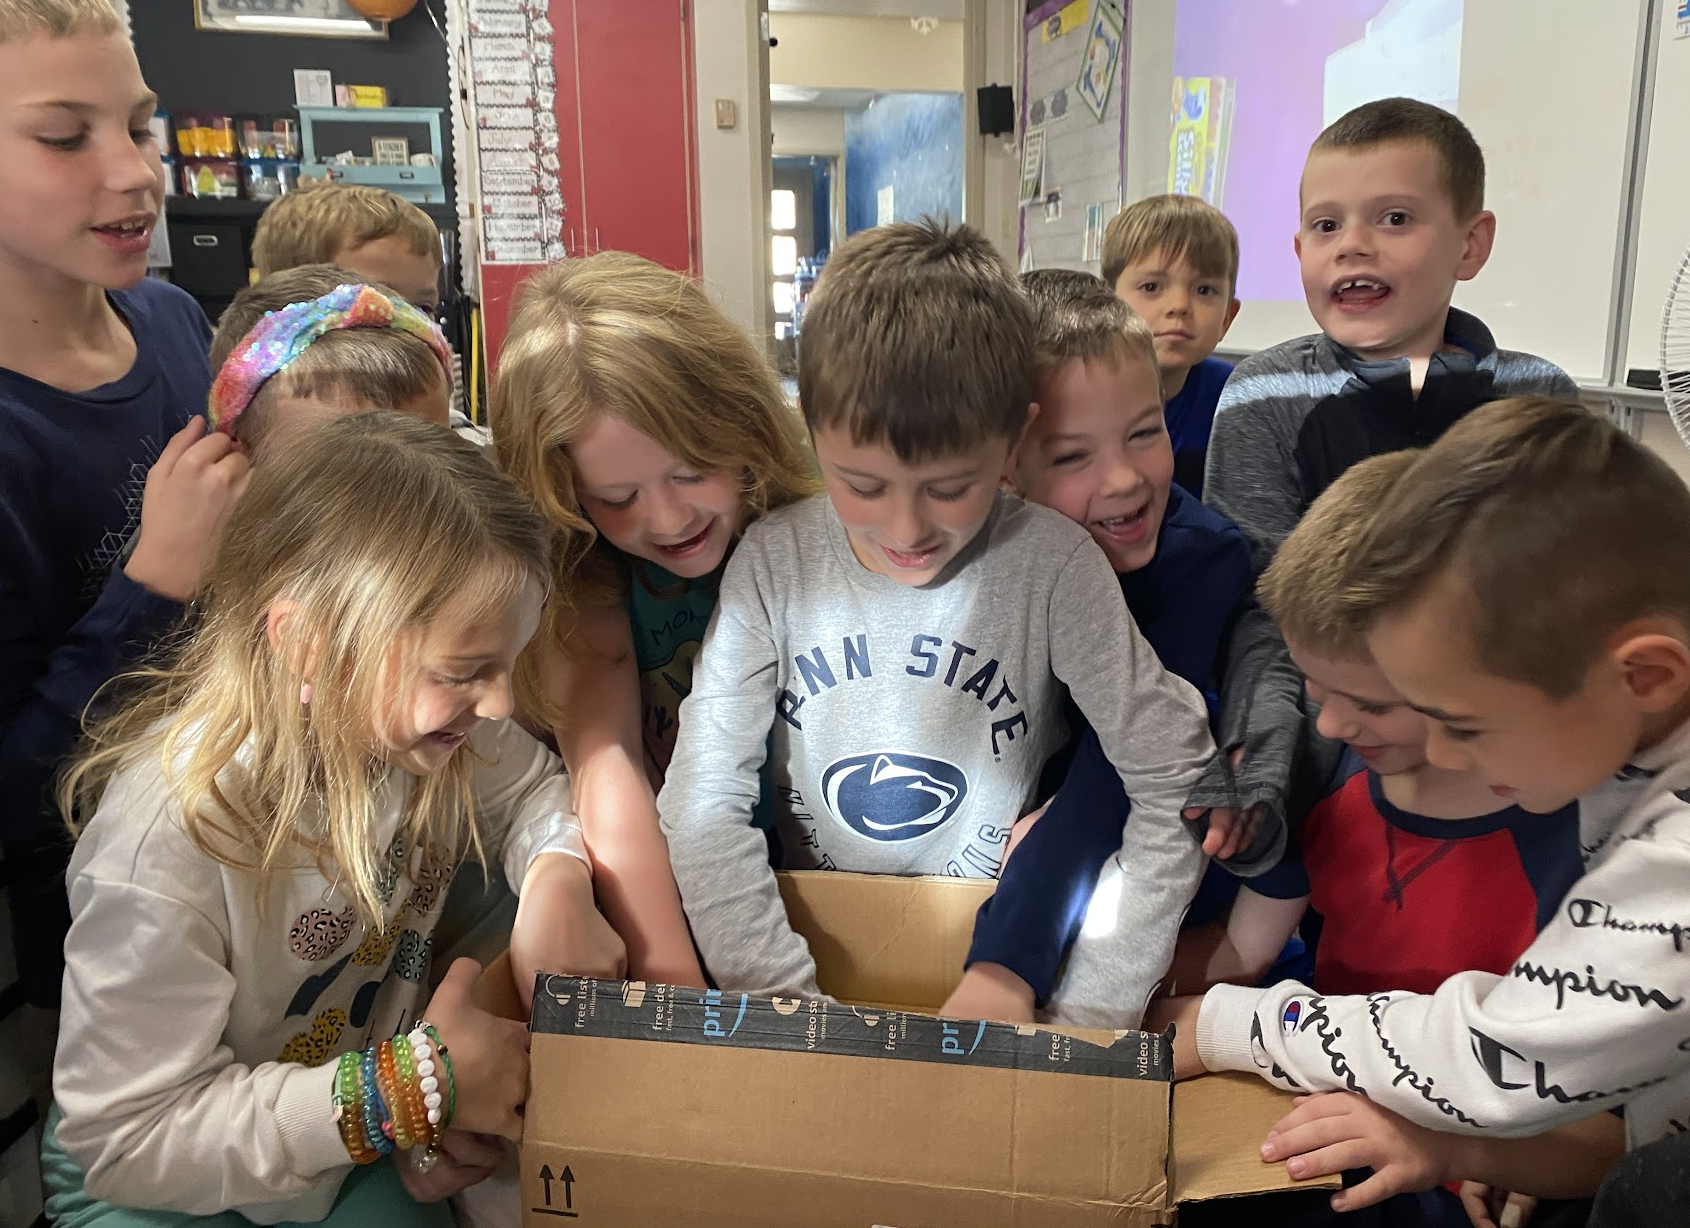 Mrs. Konopka’s students at McCullough Elementary School unbox the new literacy games which were made possible through the anonymous donation